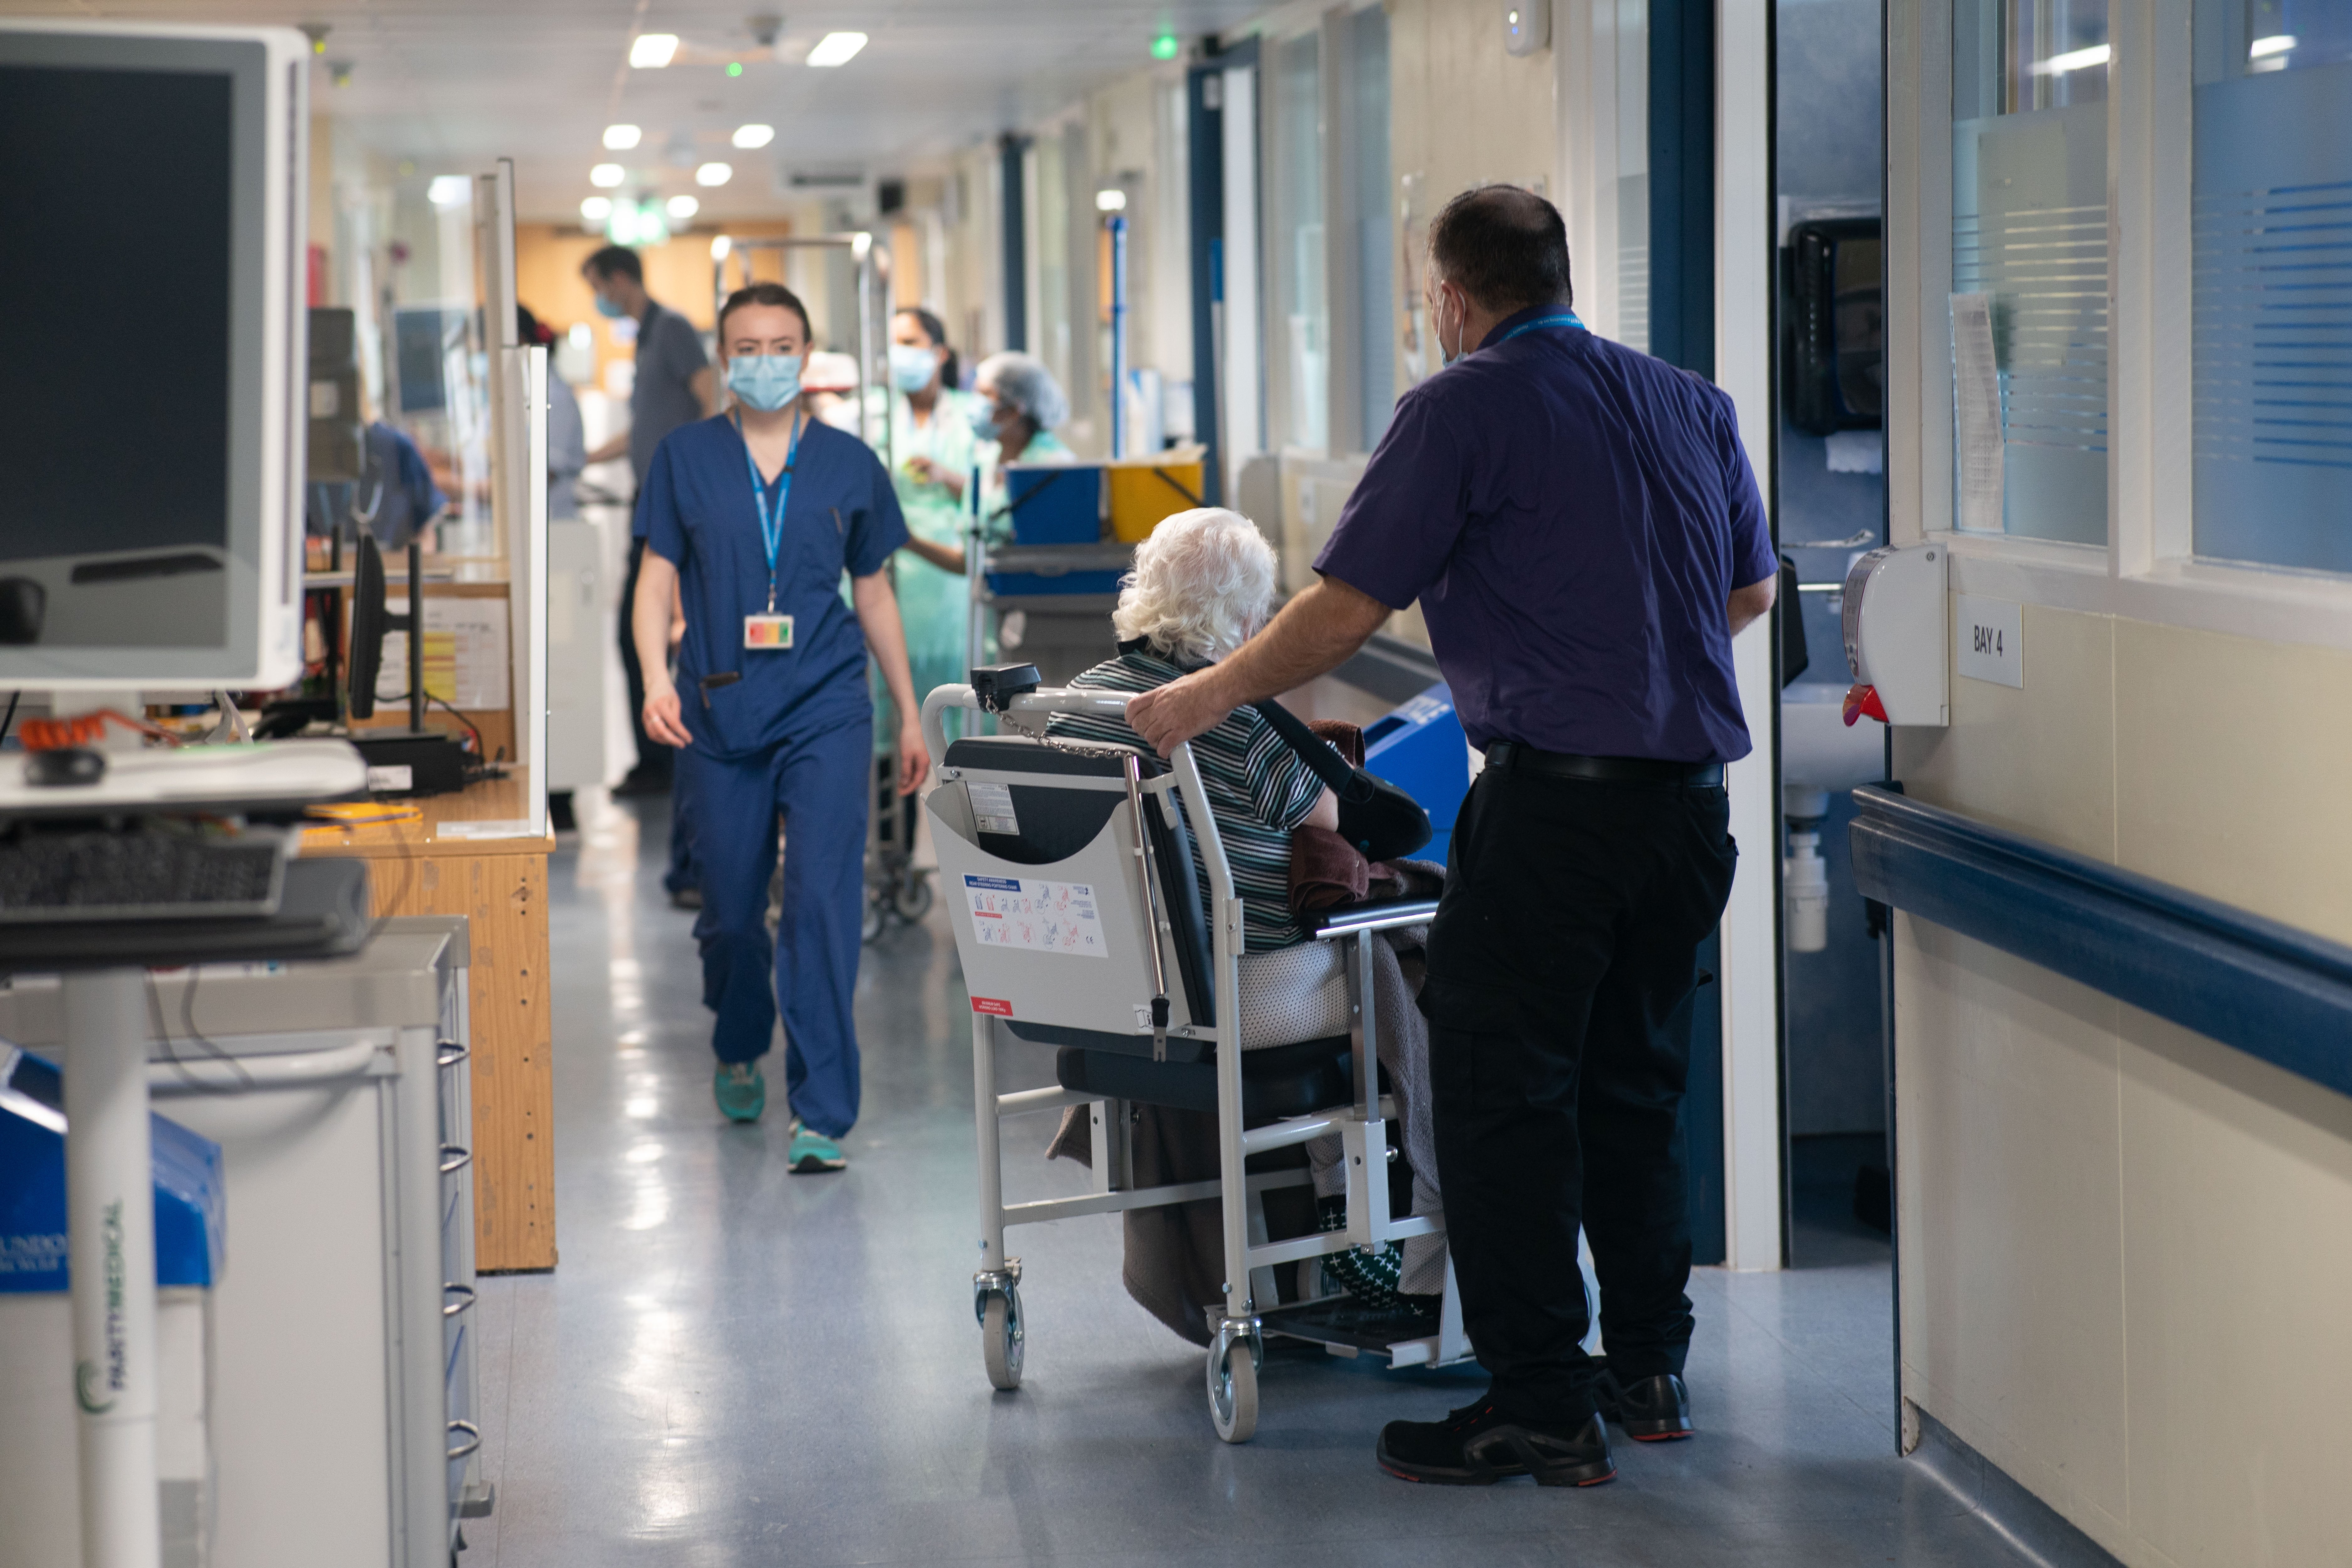 The NHS is one institution that couldn’t function without the labour of migrants